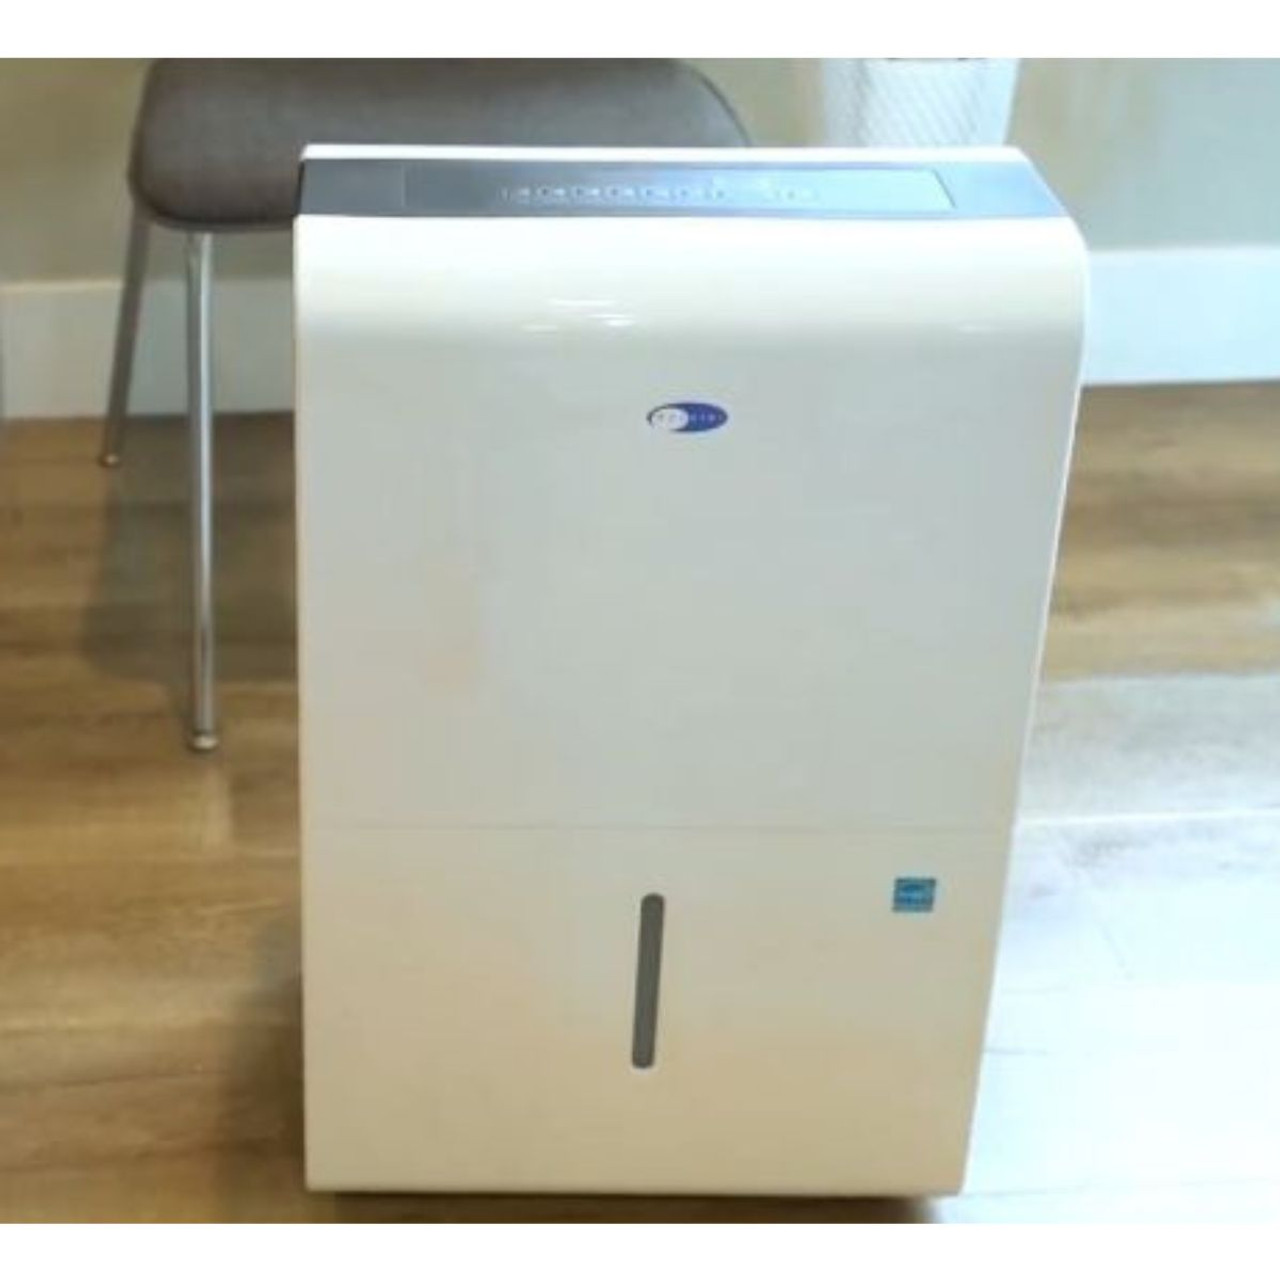  Whynter® Elite 30-Pint Dehumidifier product image